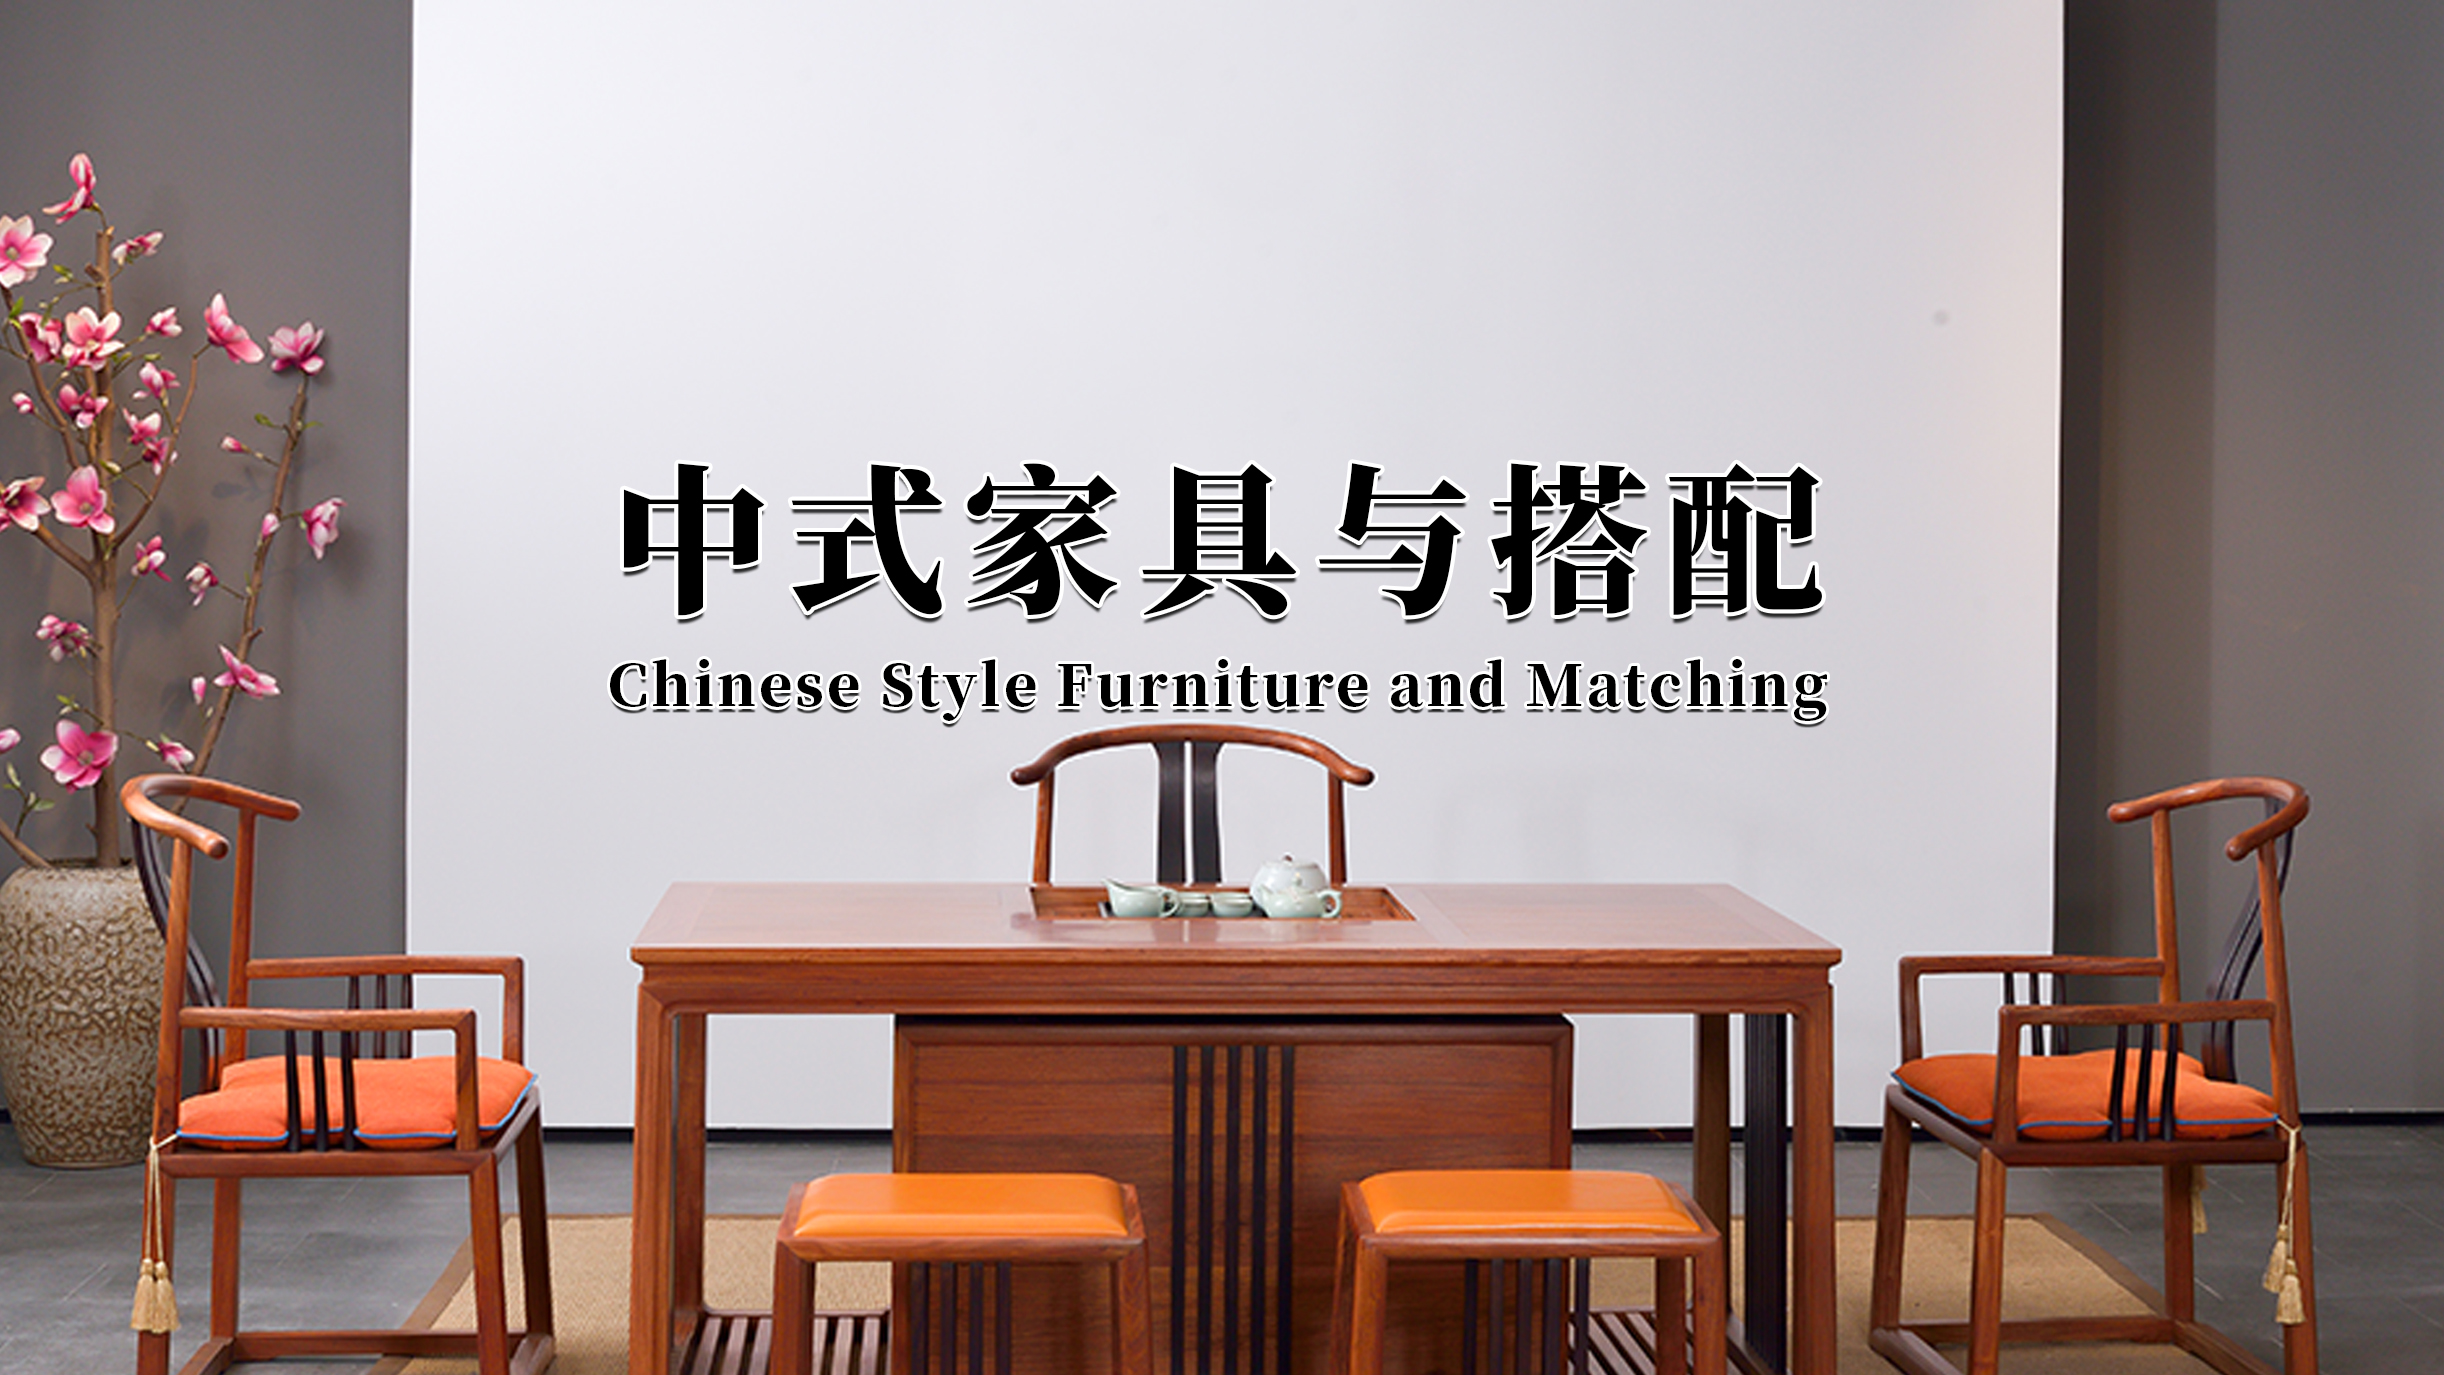 Chinese Style Furniture and Matching